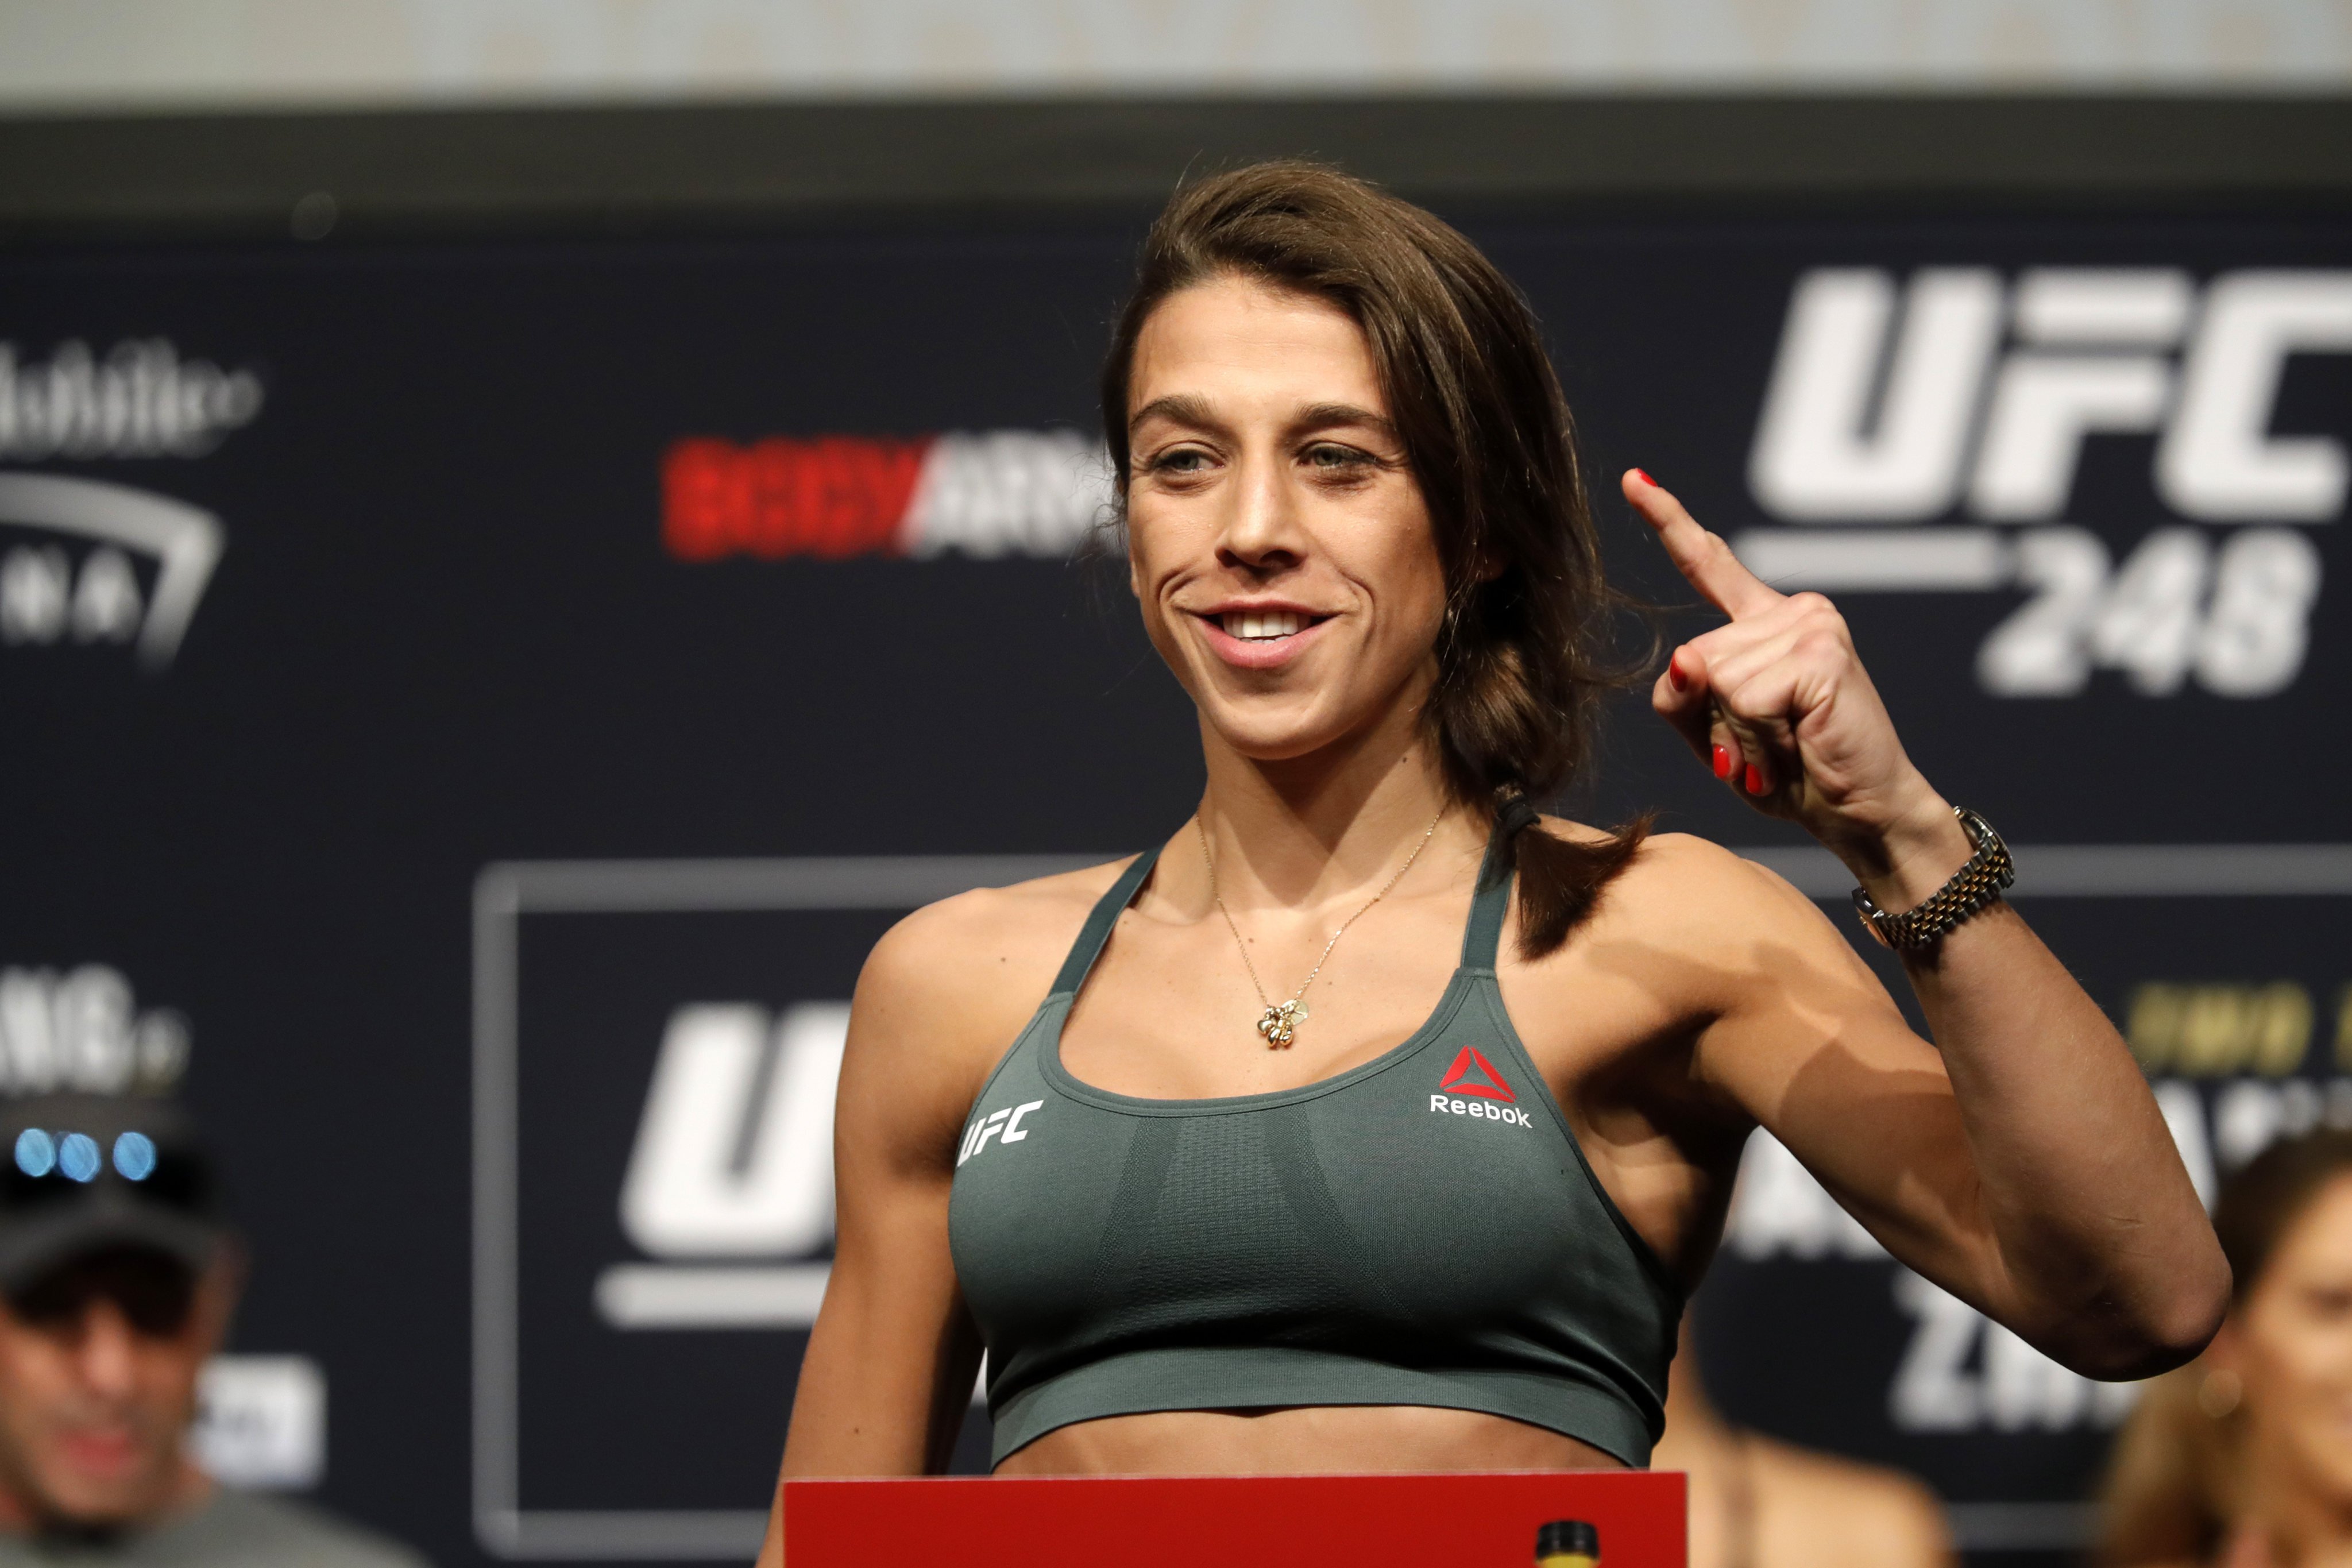 Former UFC women’s strawweight champion Joanna Jedrzejczyk of Poland poses on the scale during a ceremonial weigh-in for UFC 248 in March of 2020, in Las Vegas. Photo: Steve Marcus/Las Vegas Sun via AP)